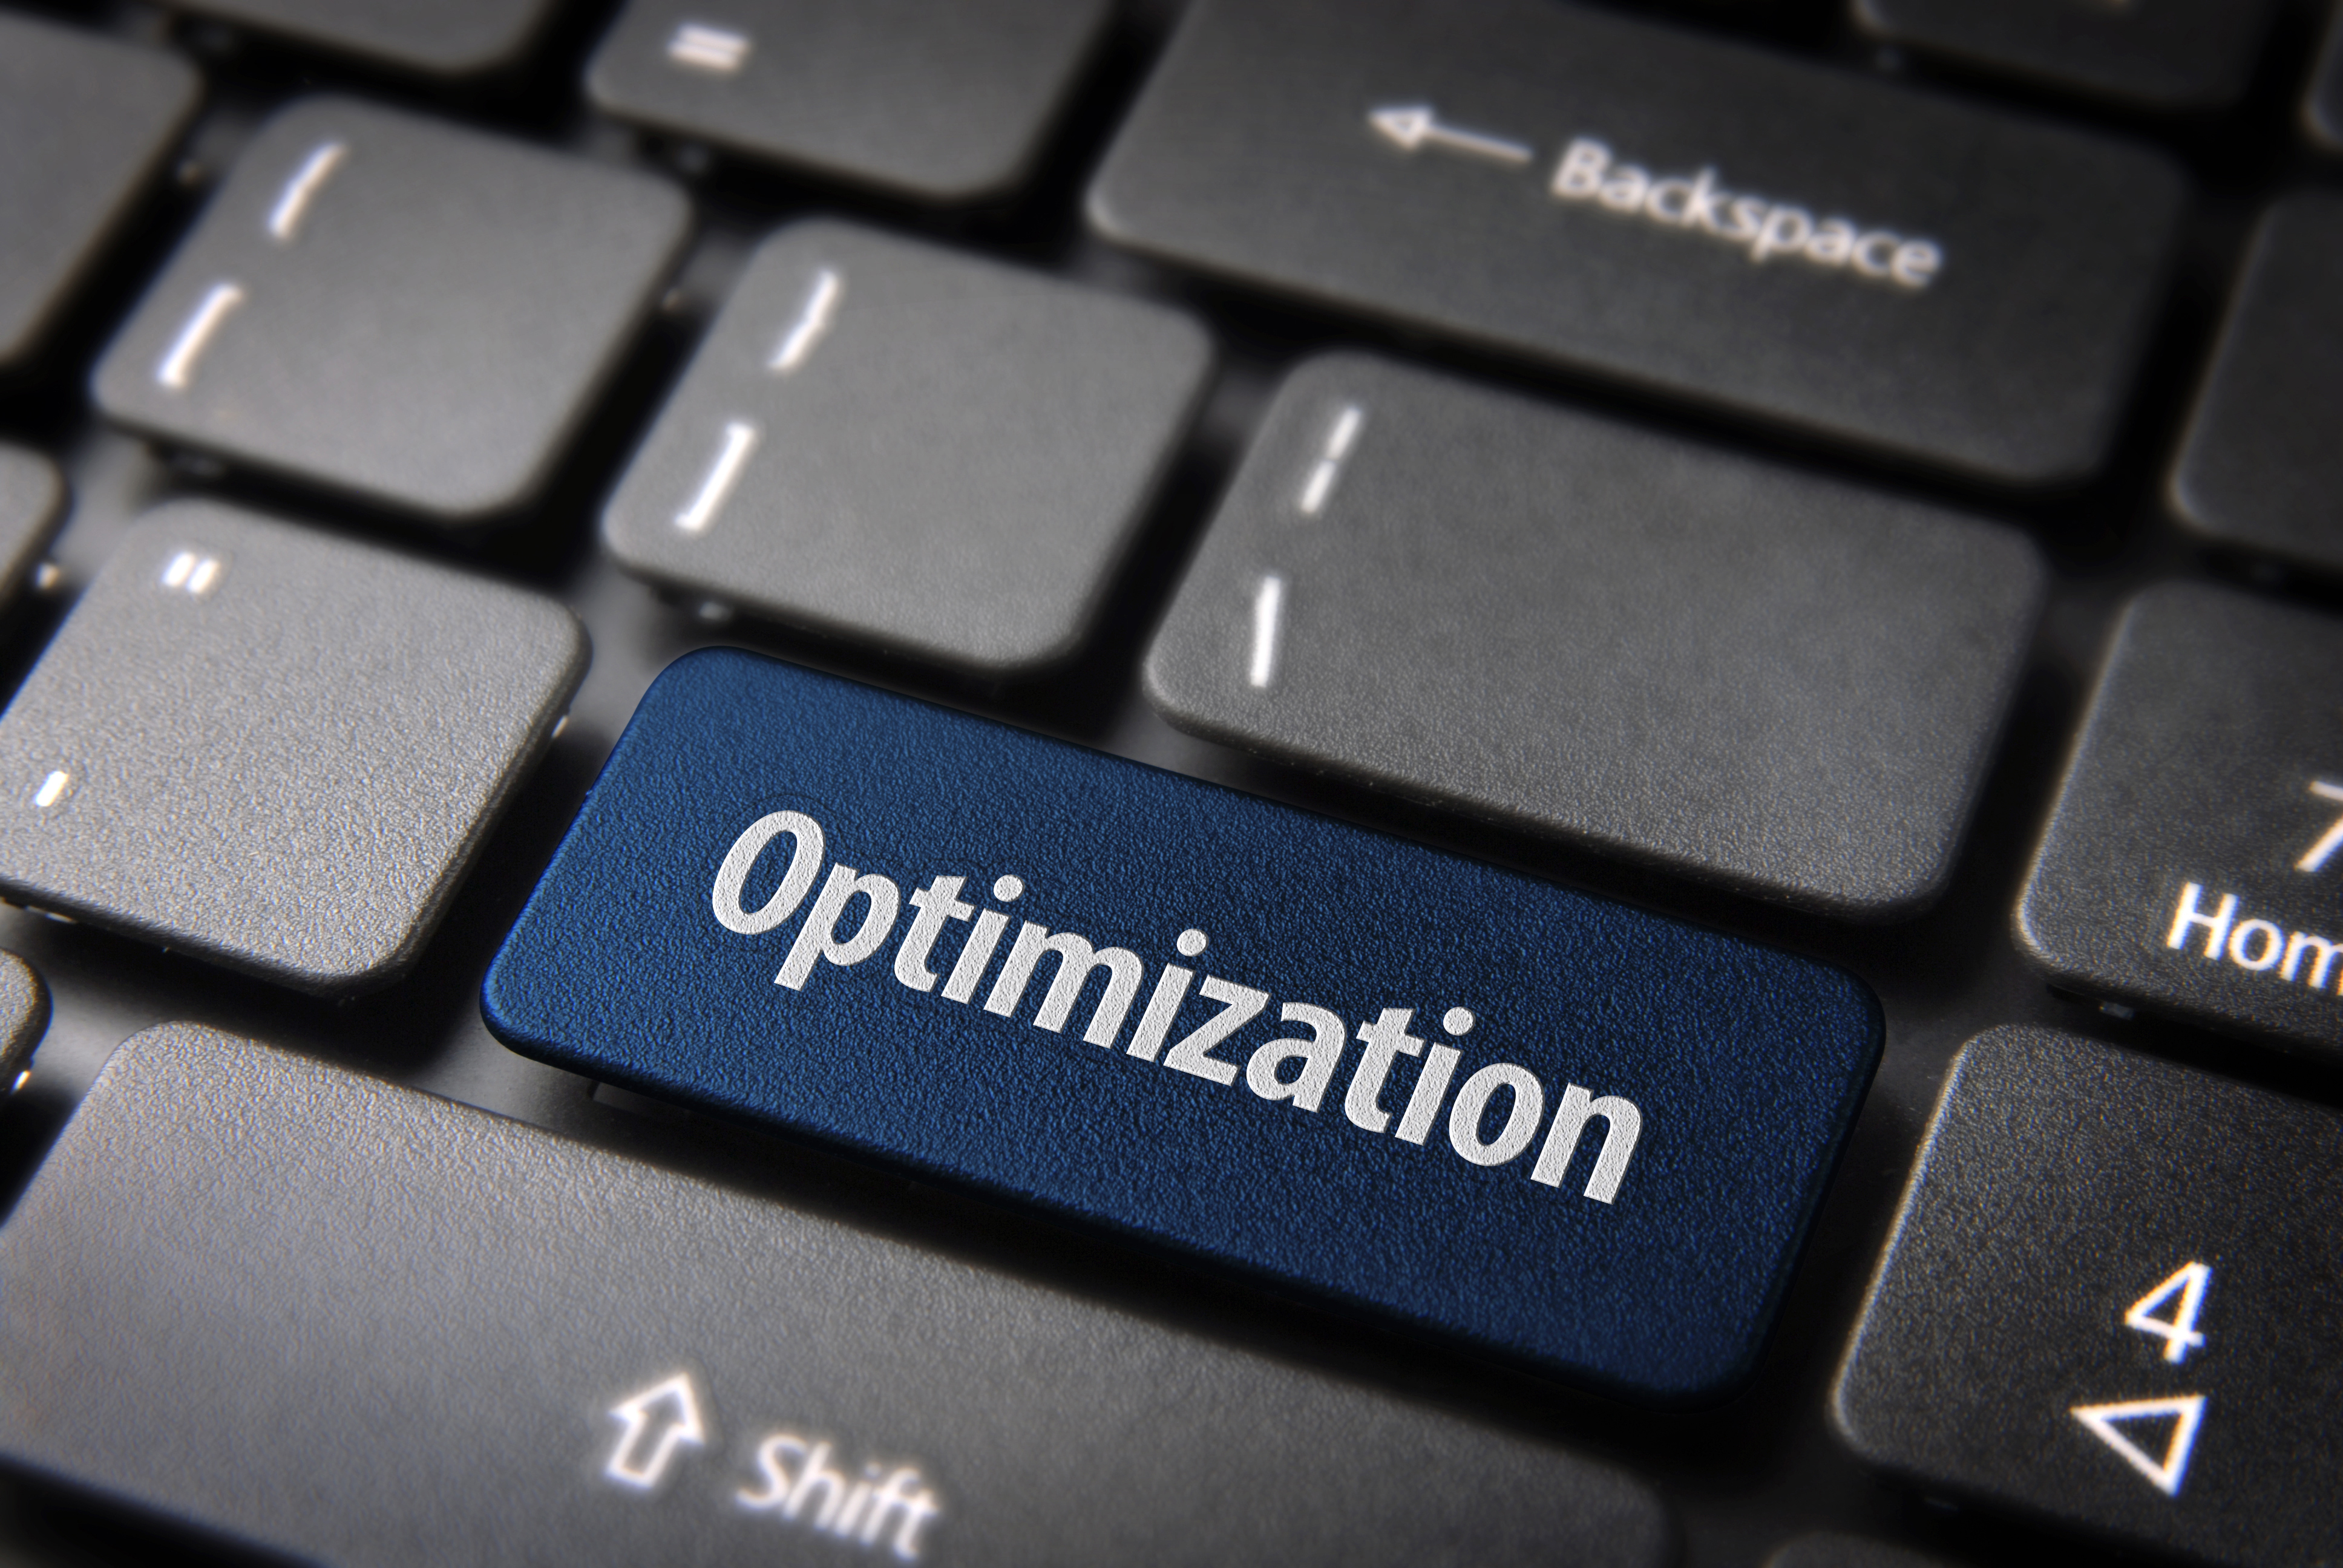 Optimizing your content